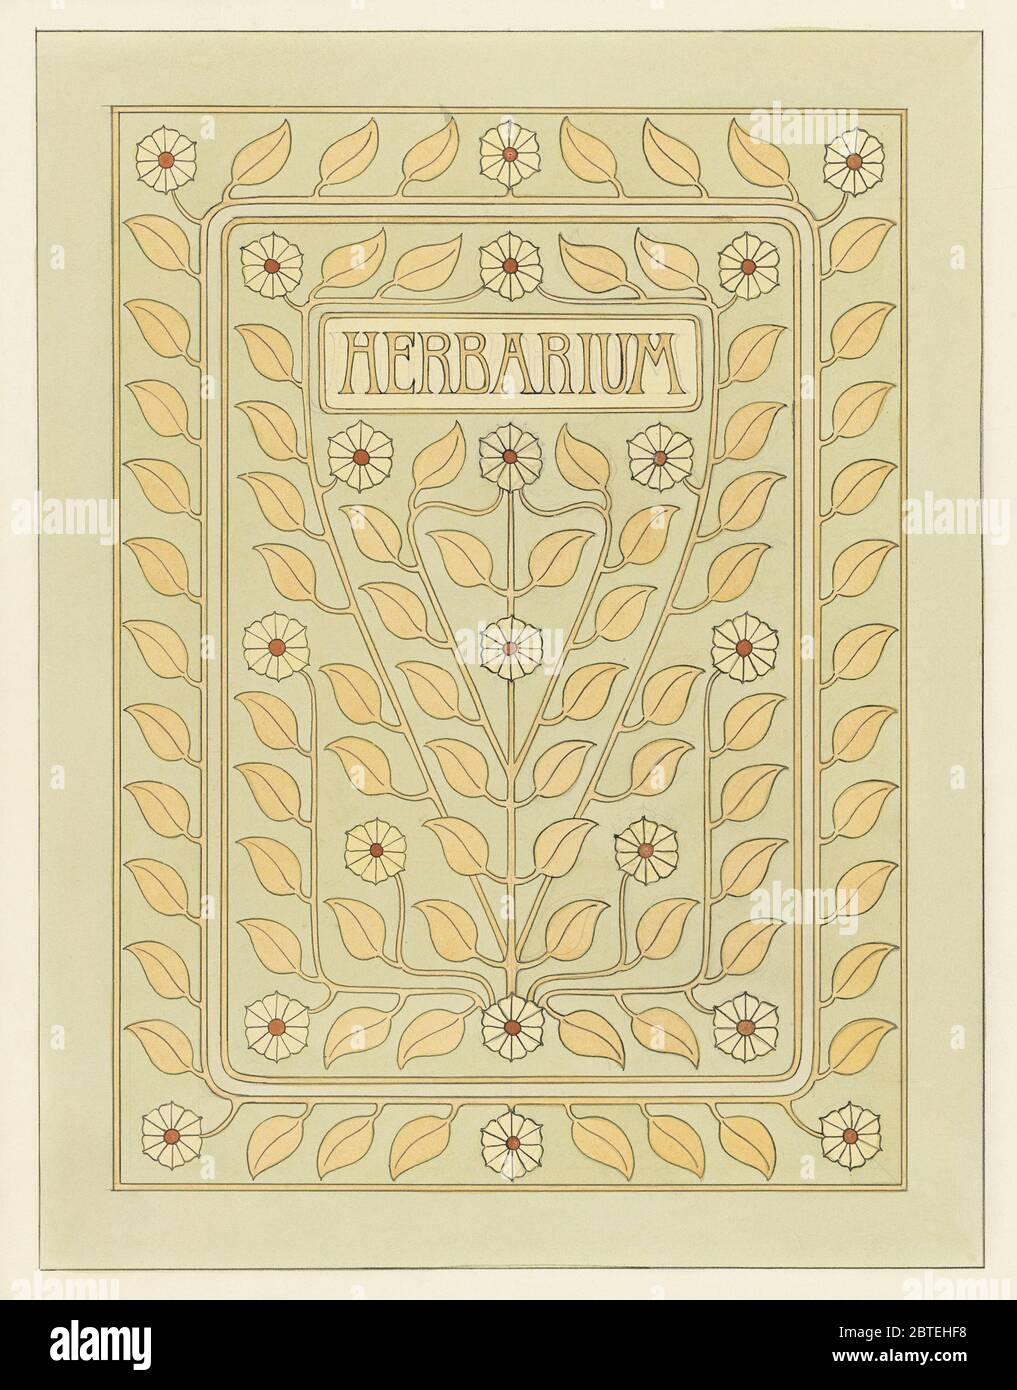 Design for Herbarium book cover by Julie de Graag (1877-1924). Original from the Rijks Museum Stock Photo